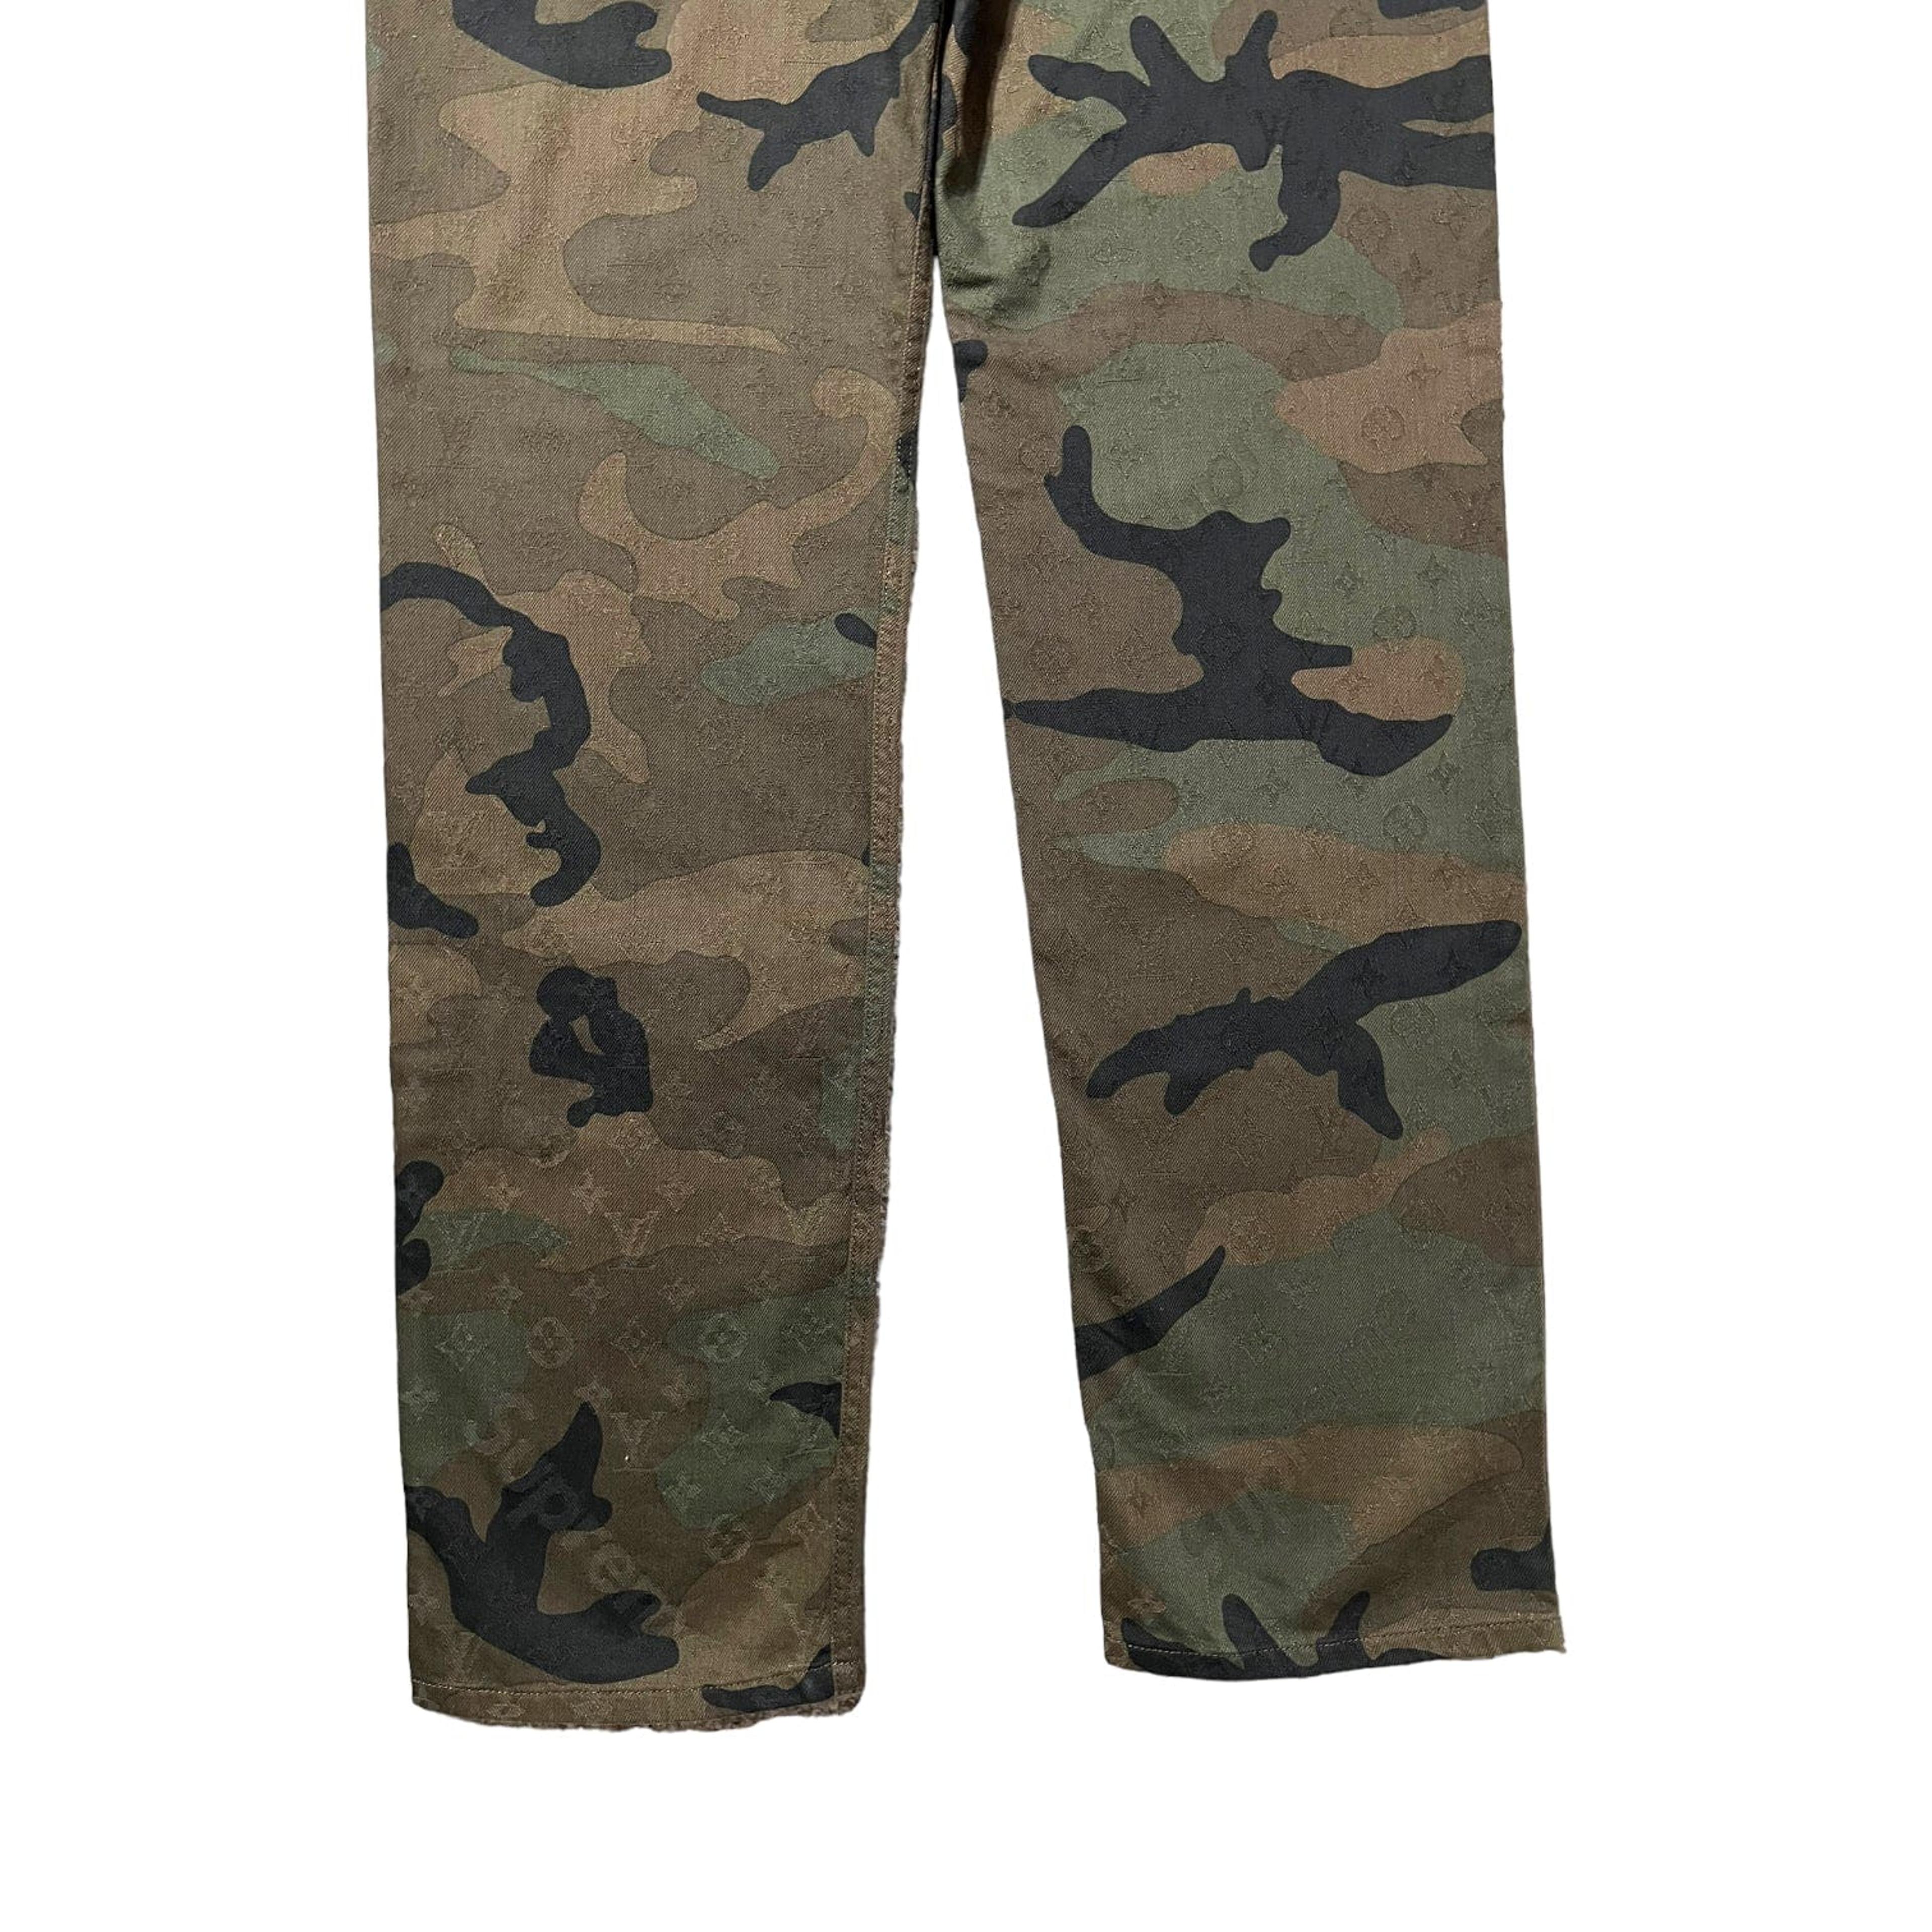 Alternate View 5 of Supreme x Louis Vuitton Jacquard Jeans Camouflage